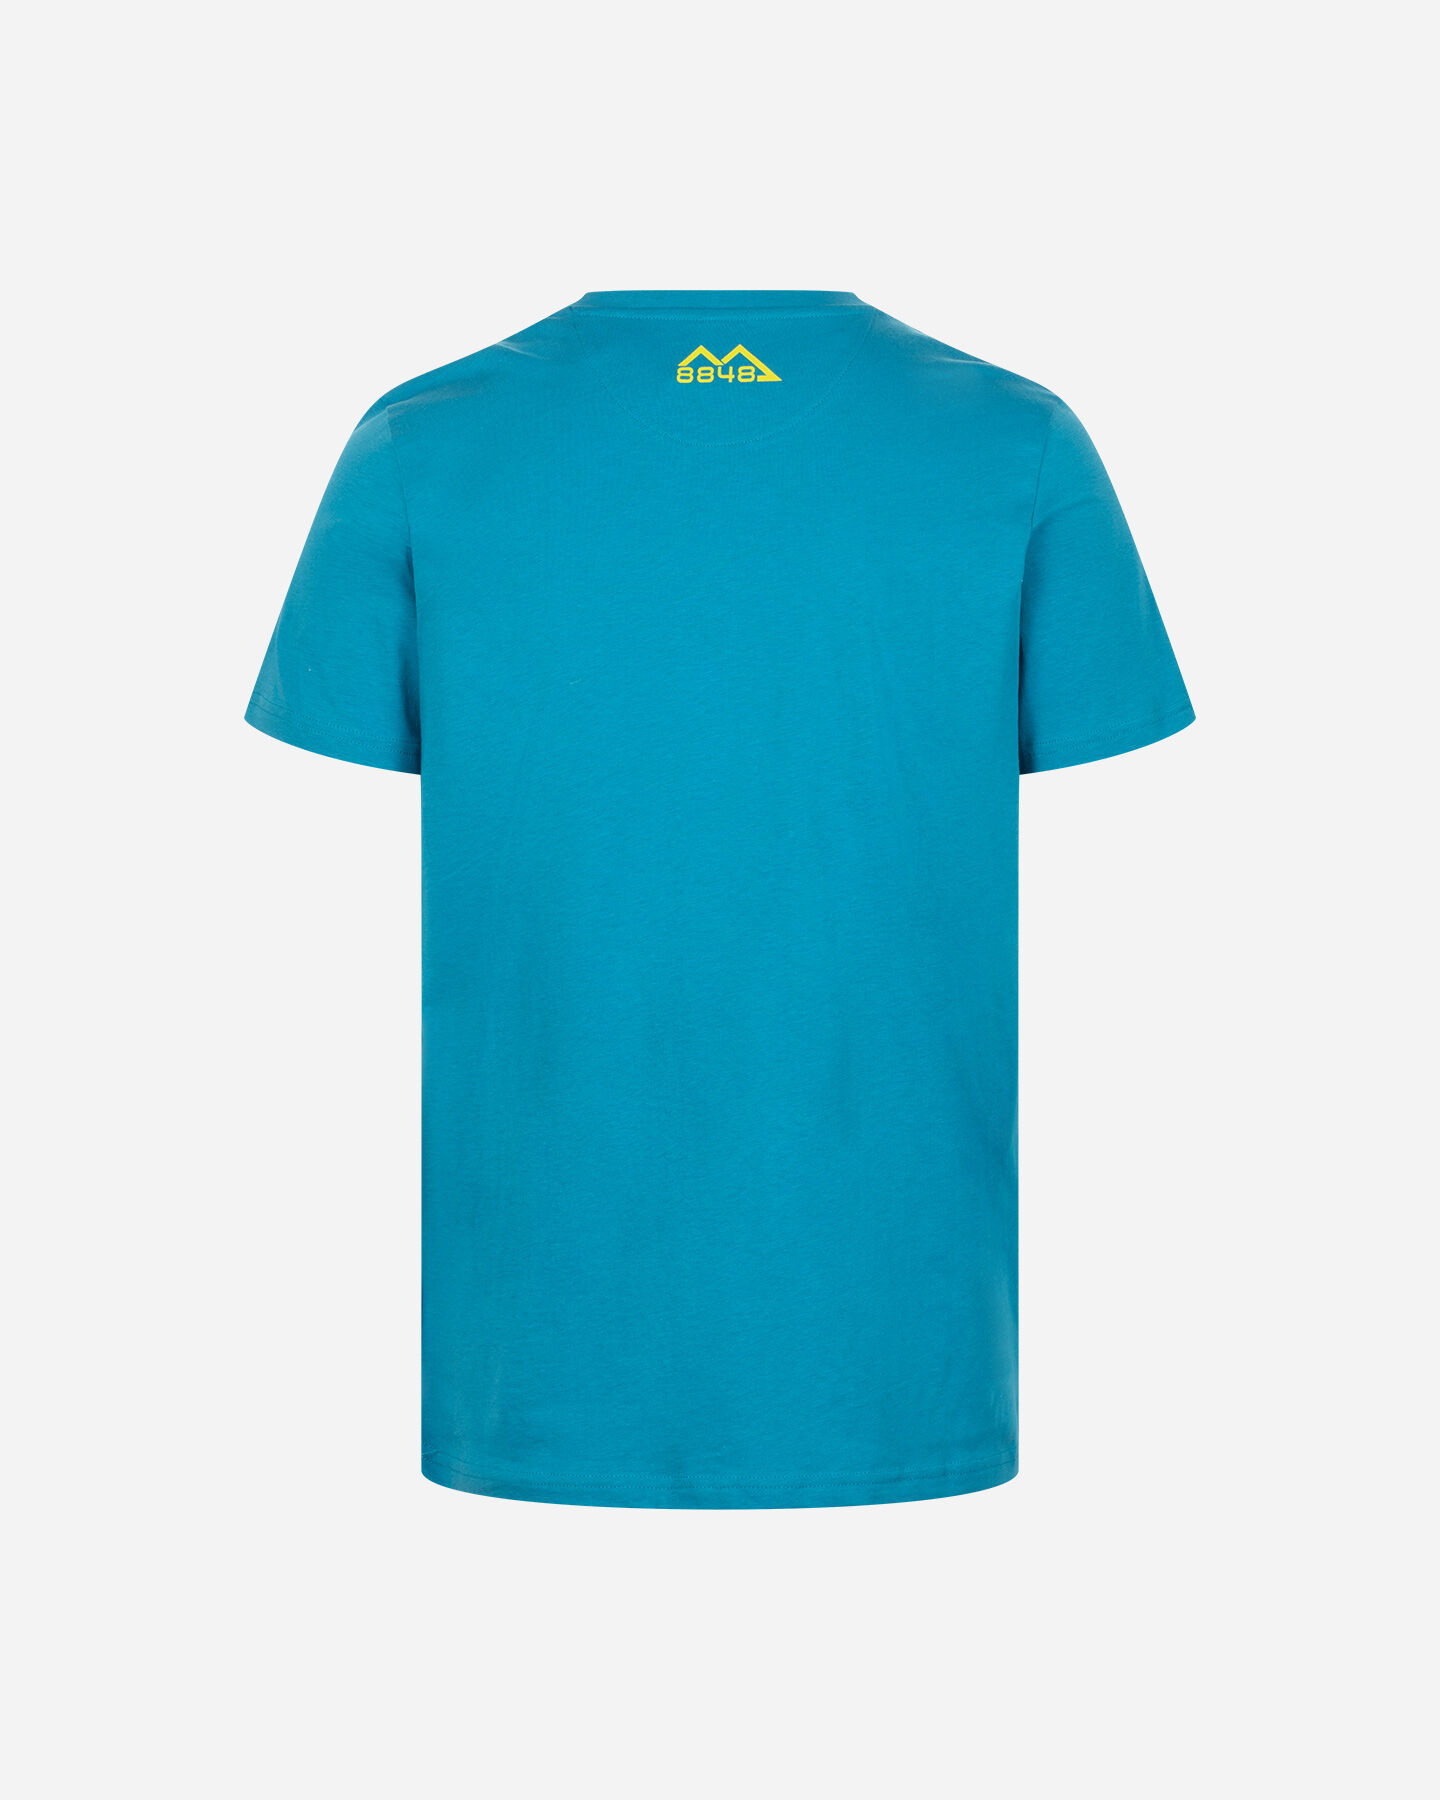  T-Shirt 8848 MOUNTAIN ESSENTIAL M S4131588|1167/M104|S scatto 1